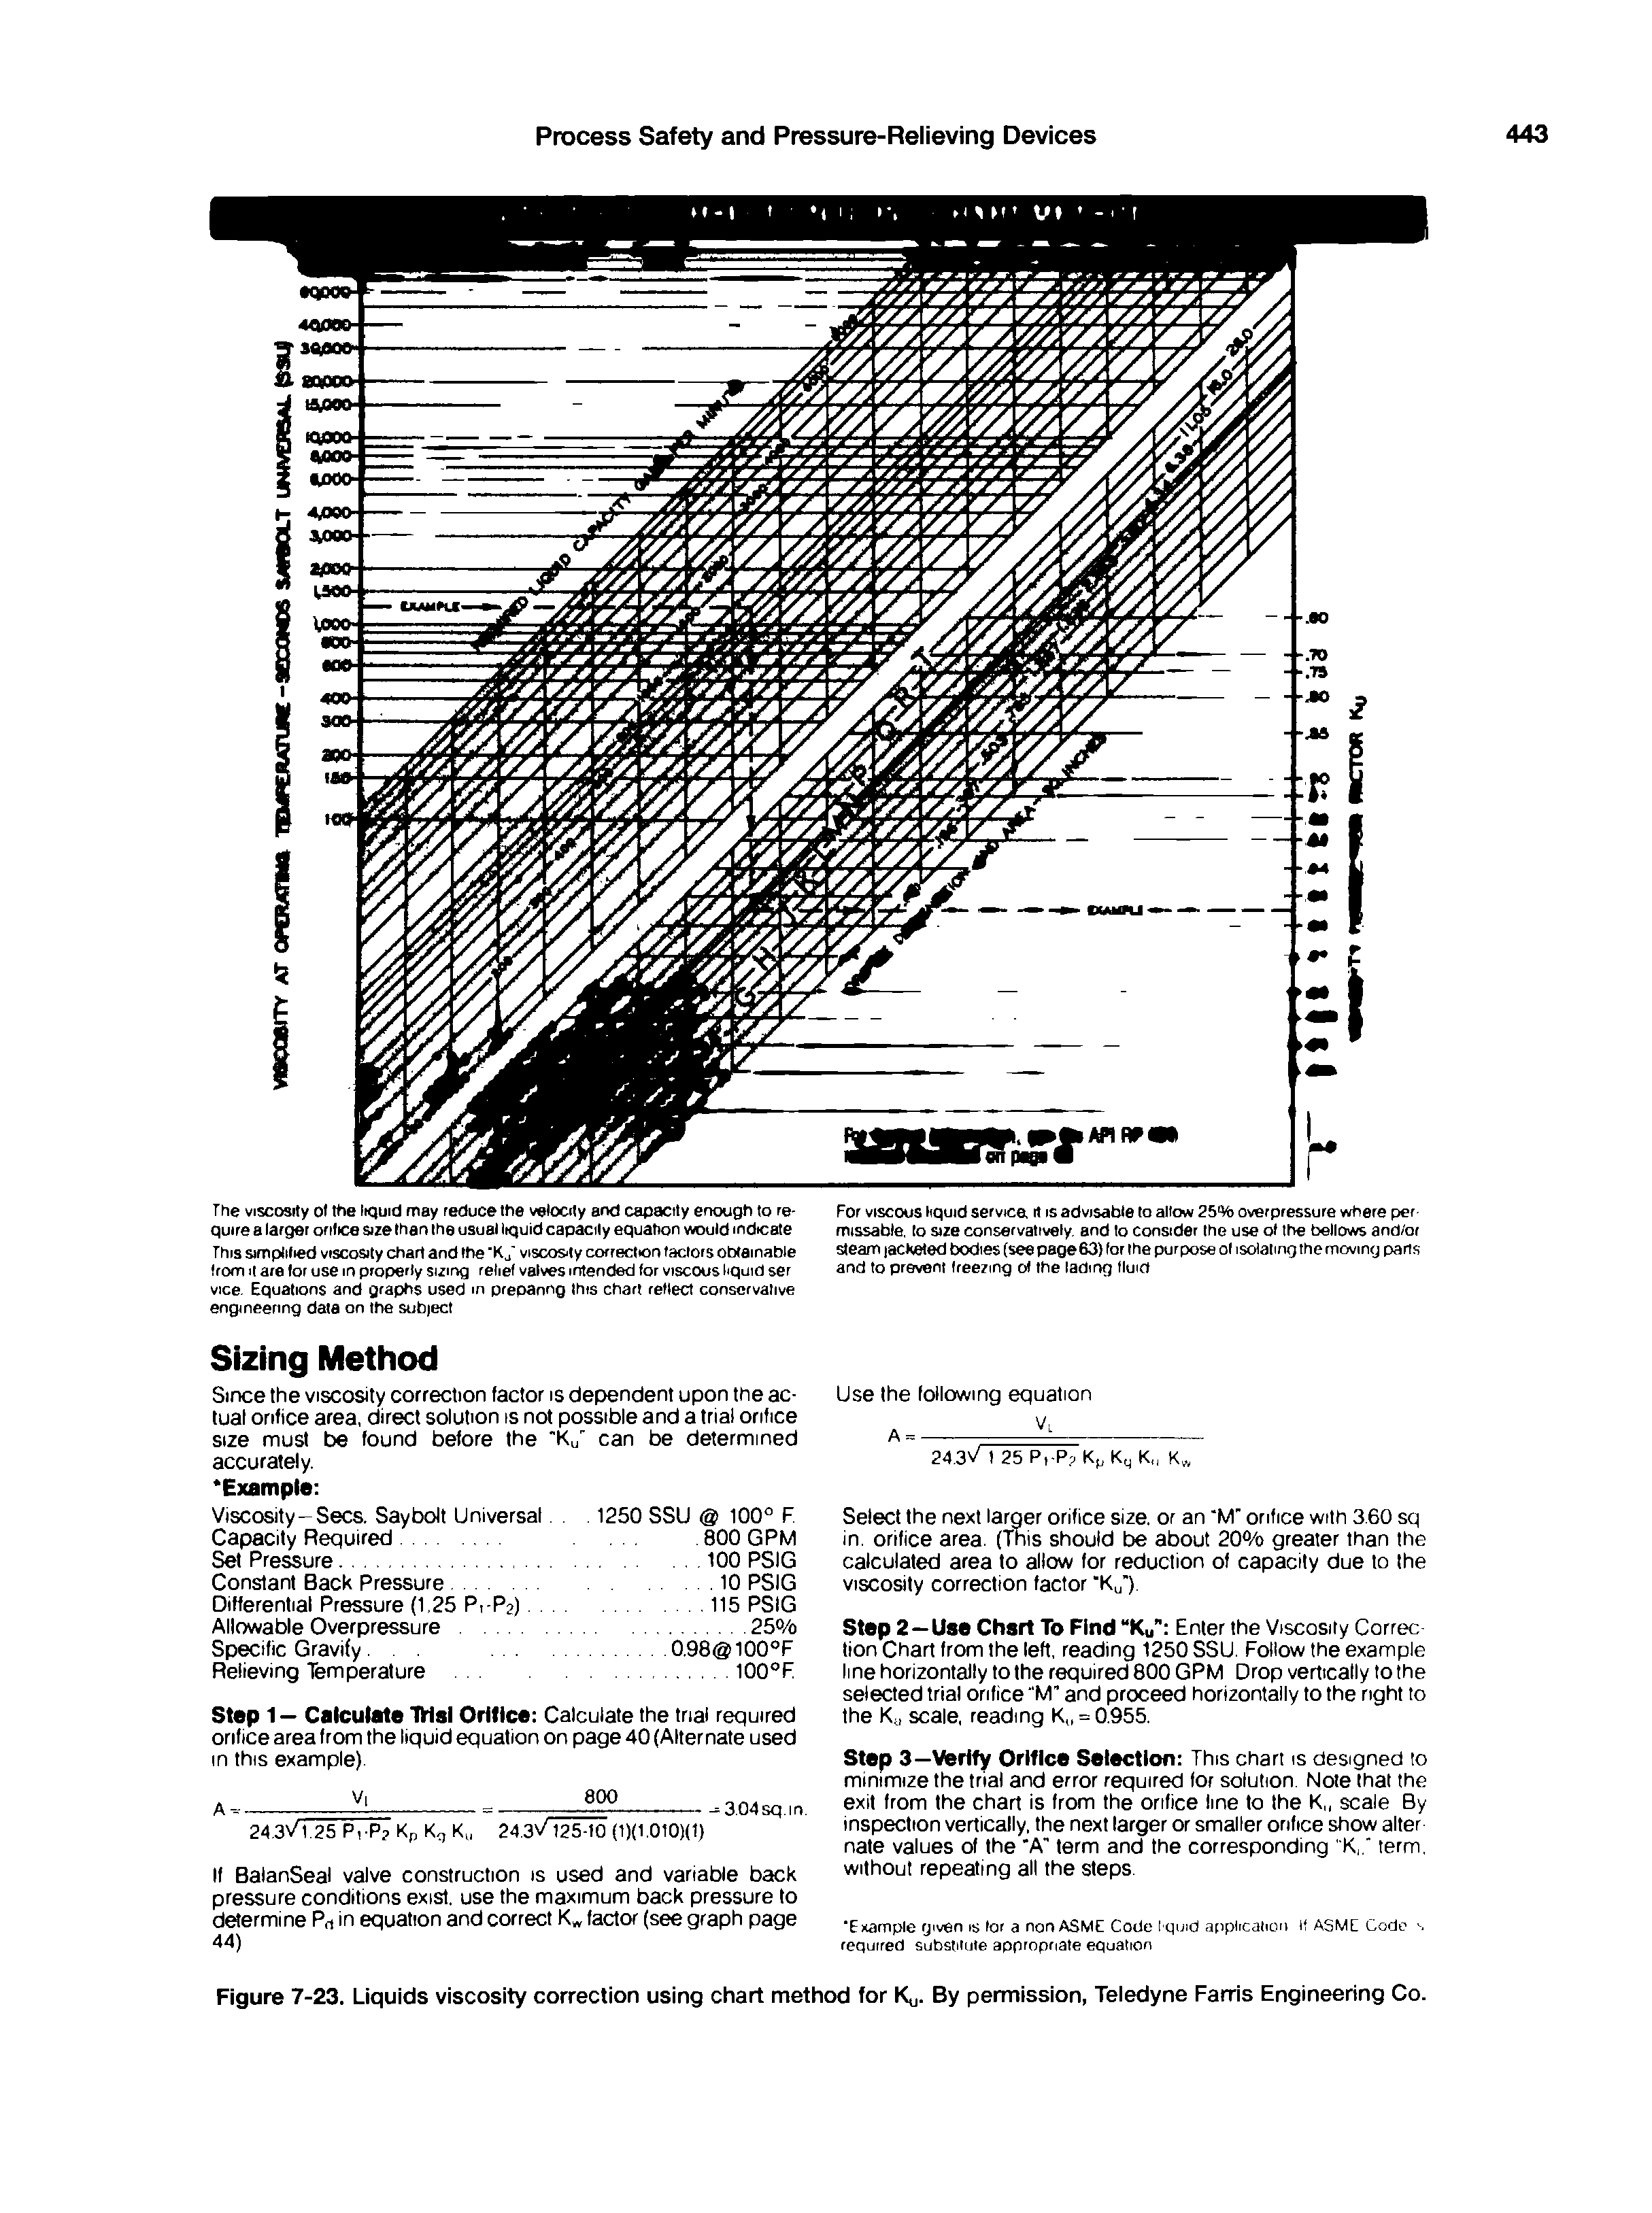 Figure 7-23. Liquids viscosity correction using chart method for Kp. By permission, Teledyne Farris Engineering Co.